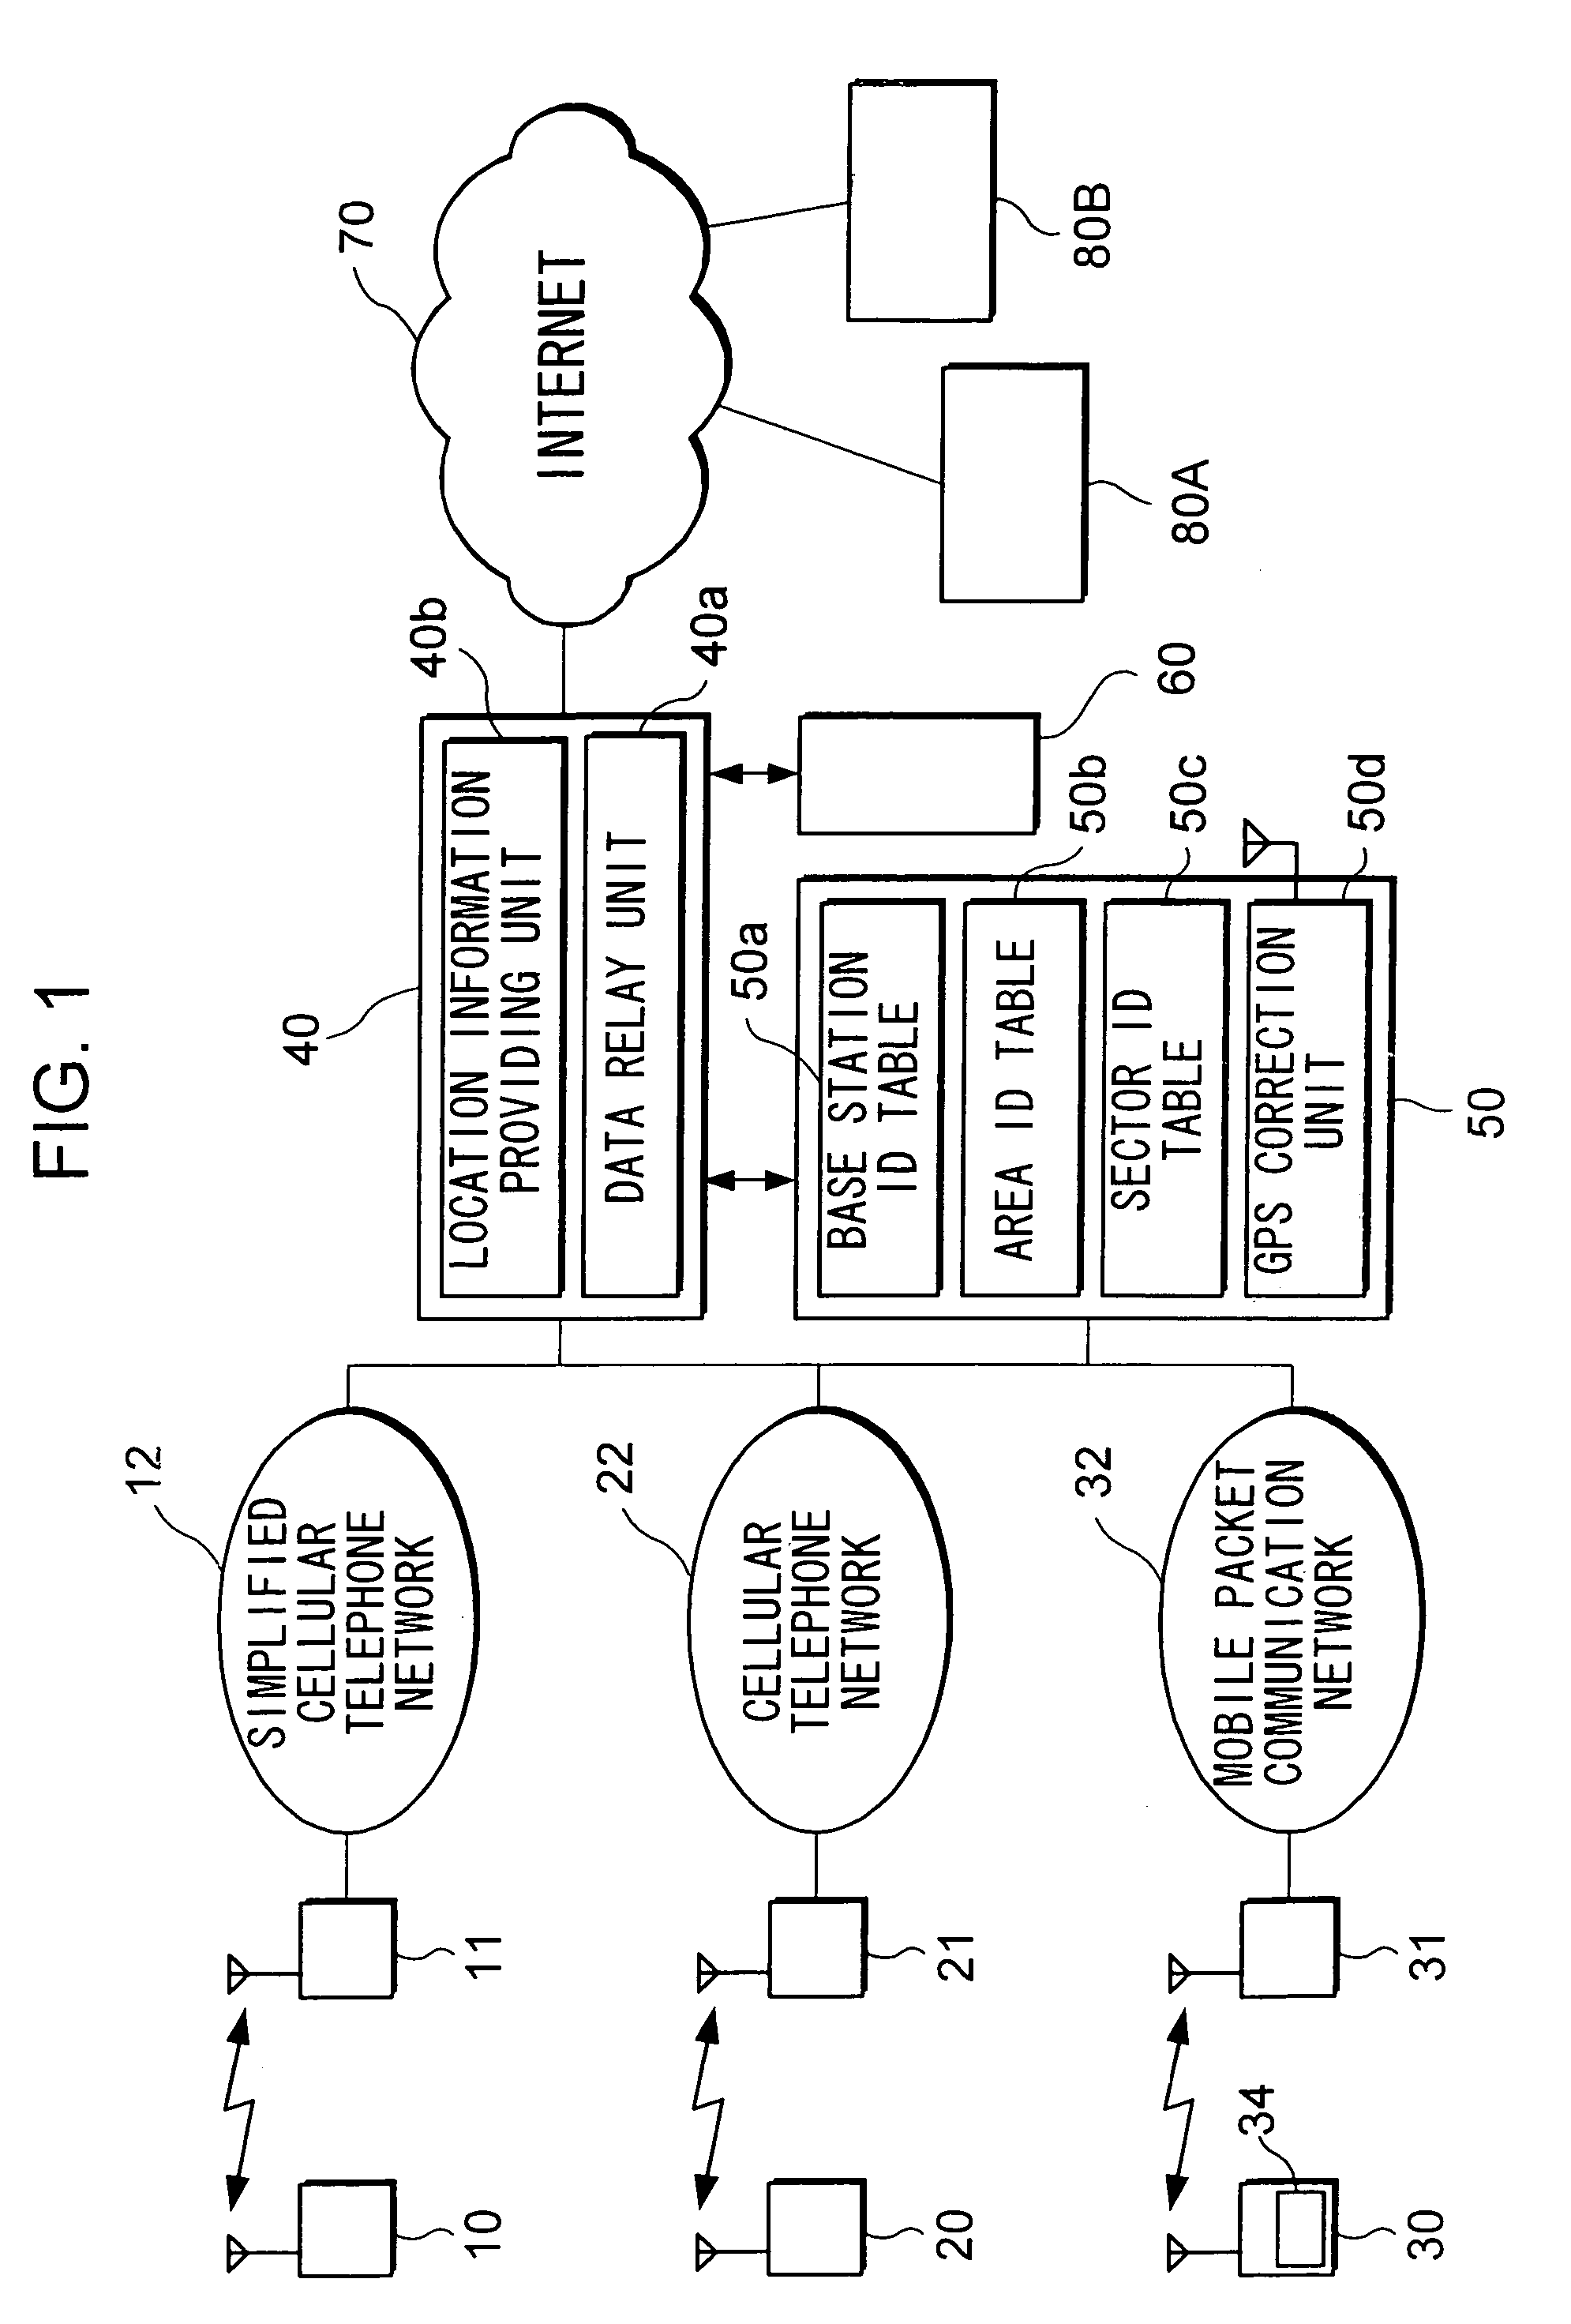 Location information notifying method and location information notifying apparatus